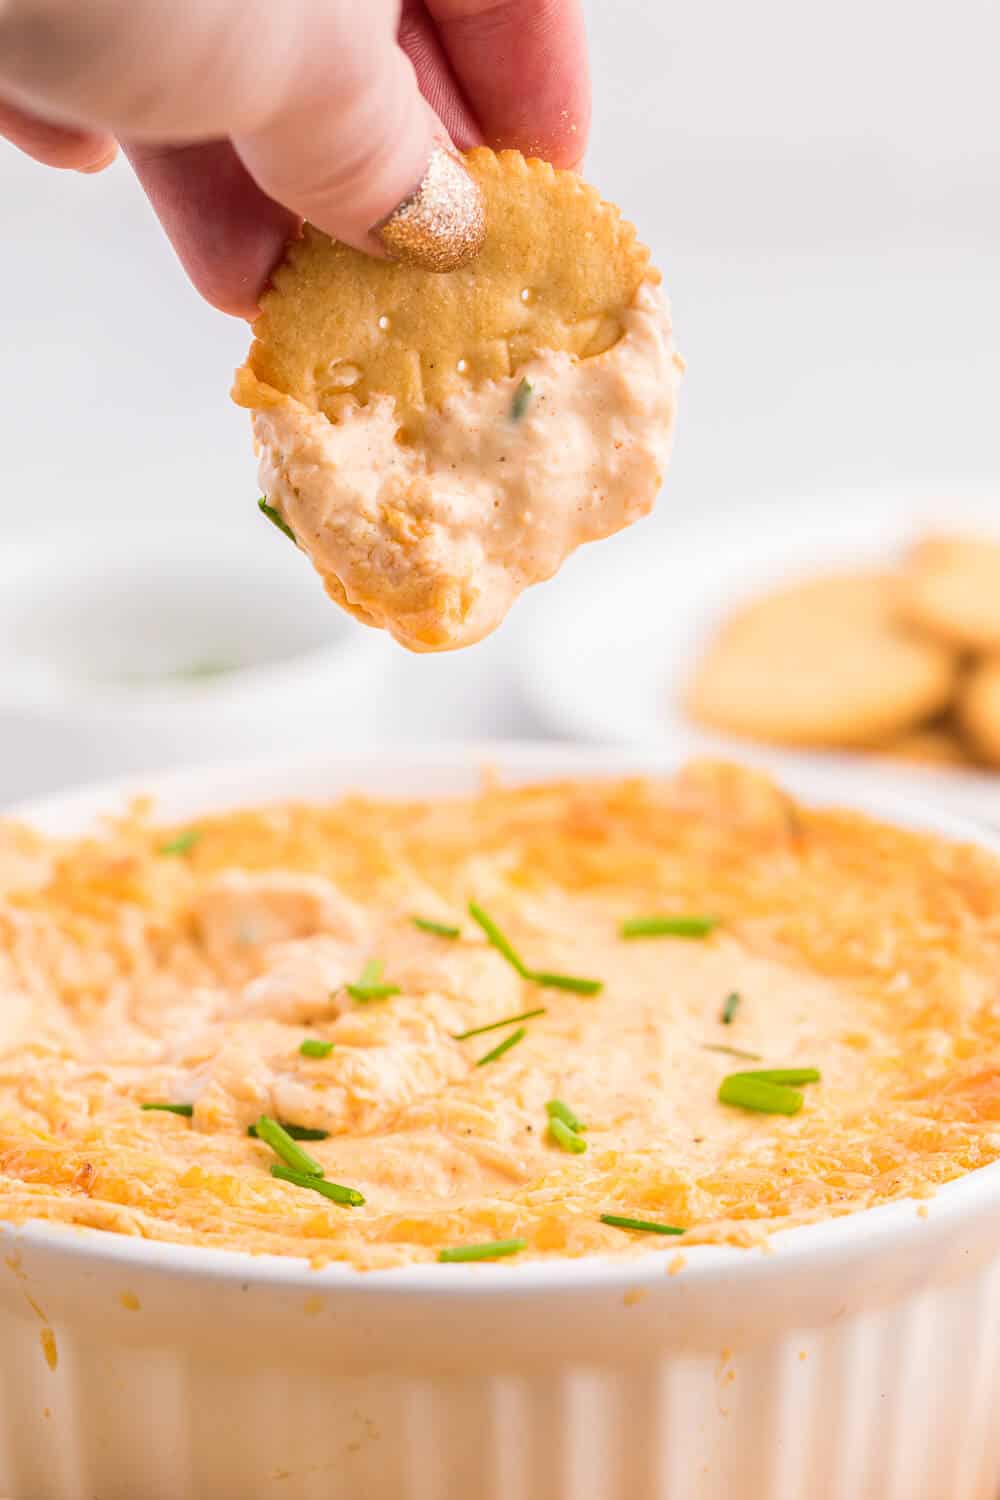 A hand holding a cracker with crab dip on it.